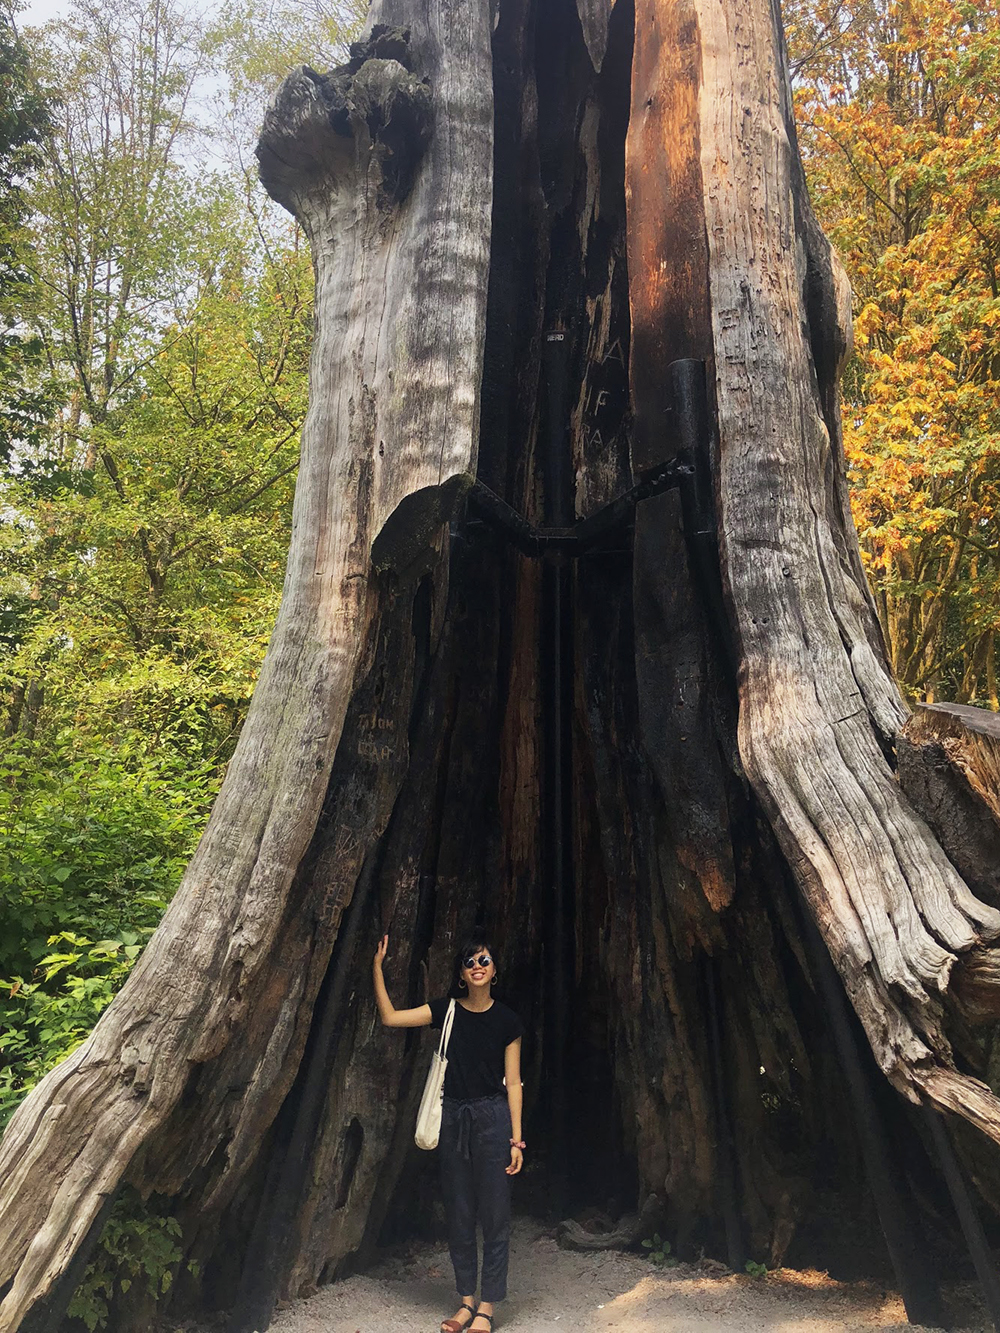 Jiajia standing in front of a very large tree in Stanley Park, Vancouver.